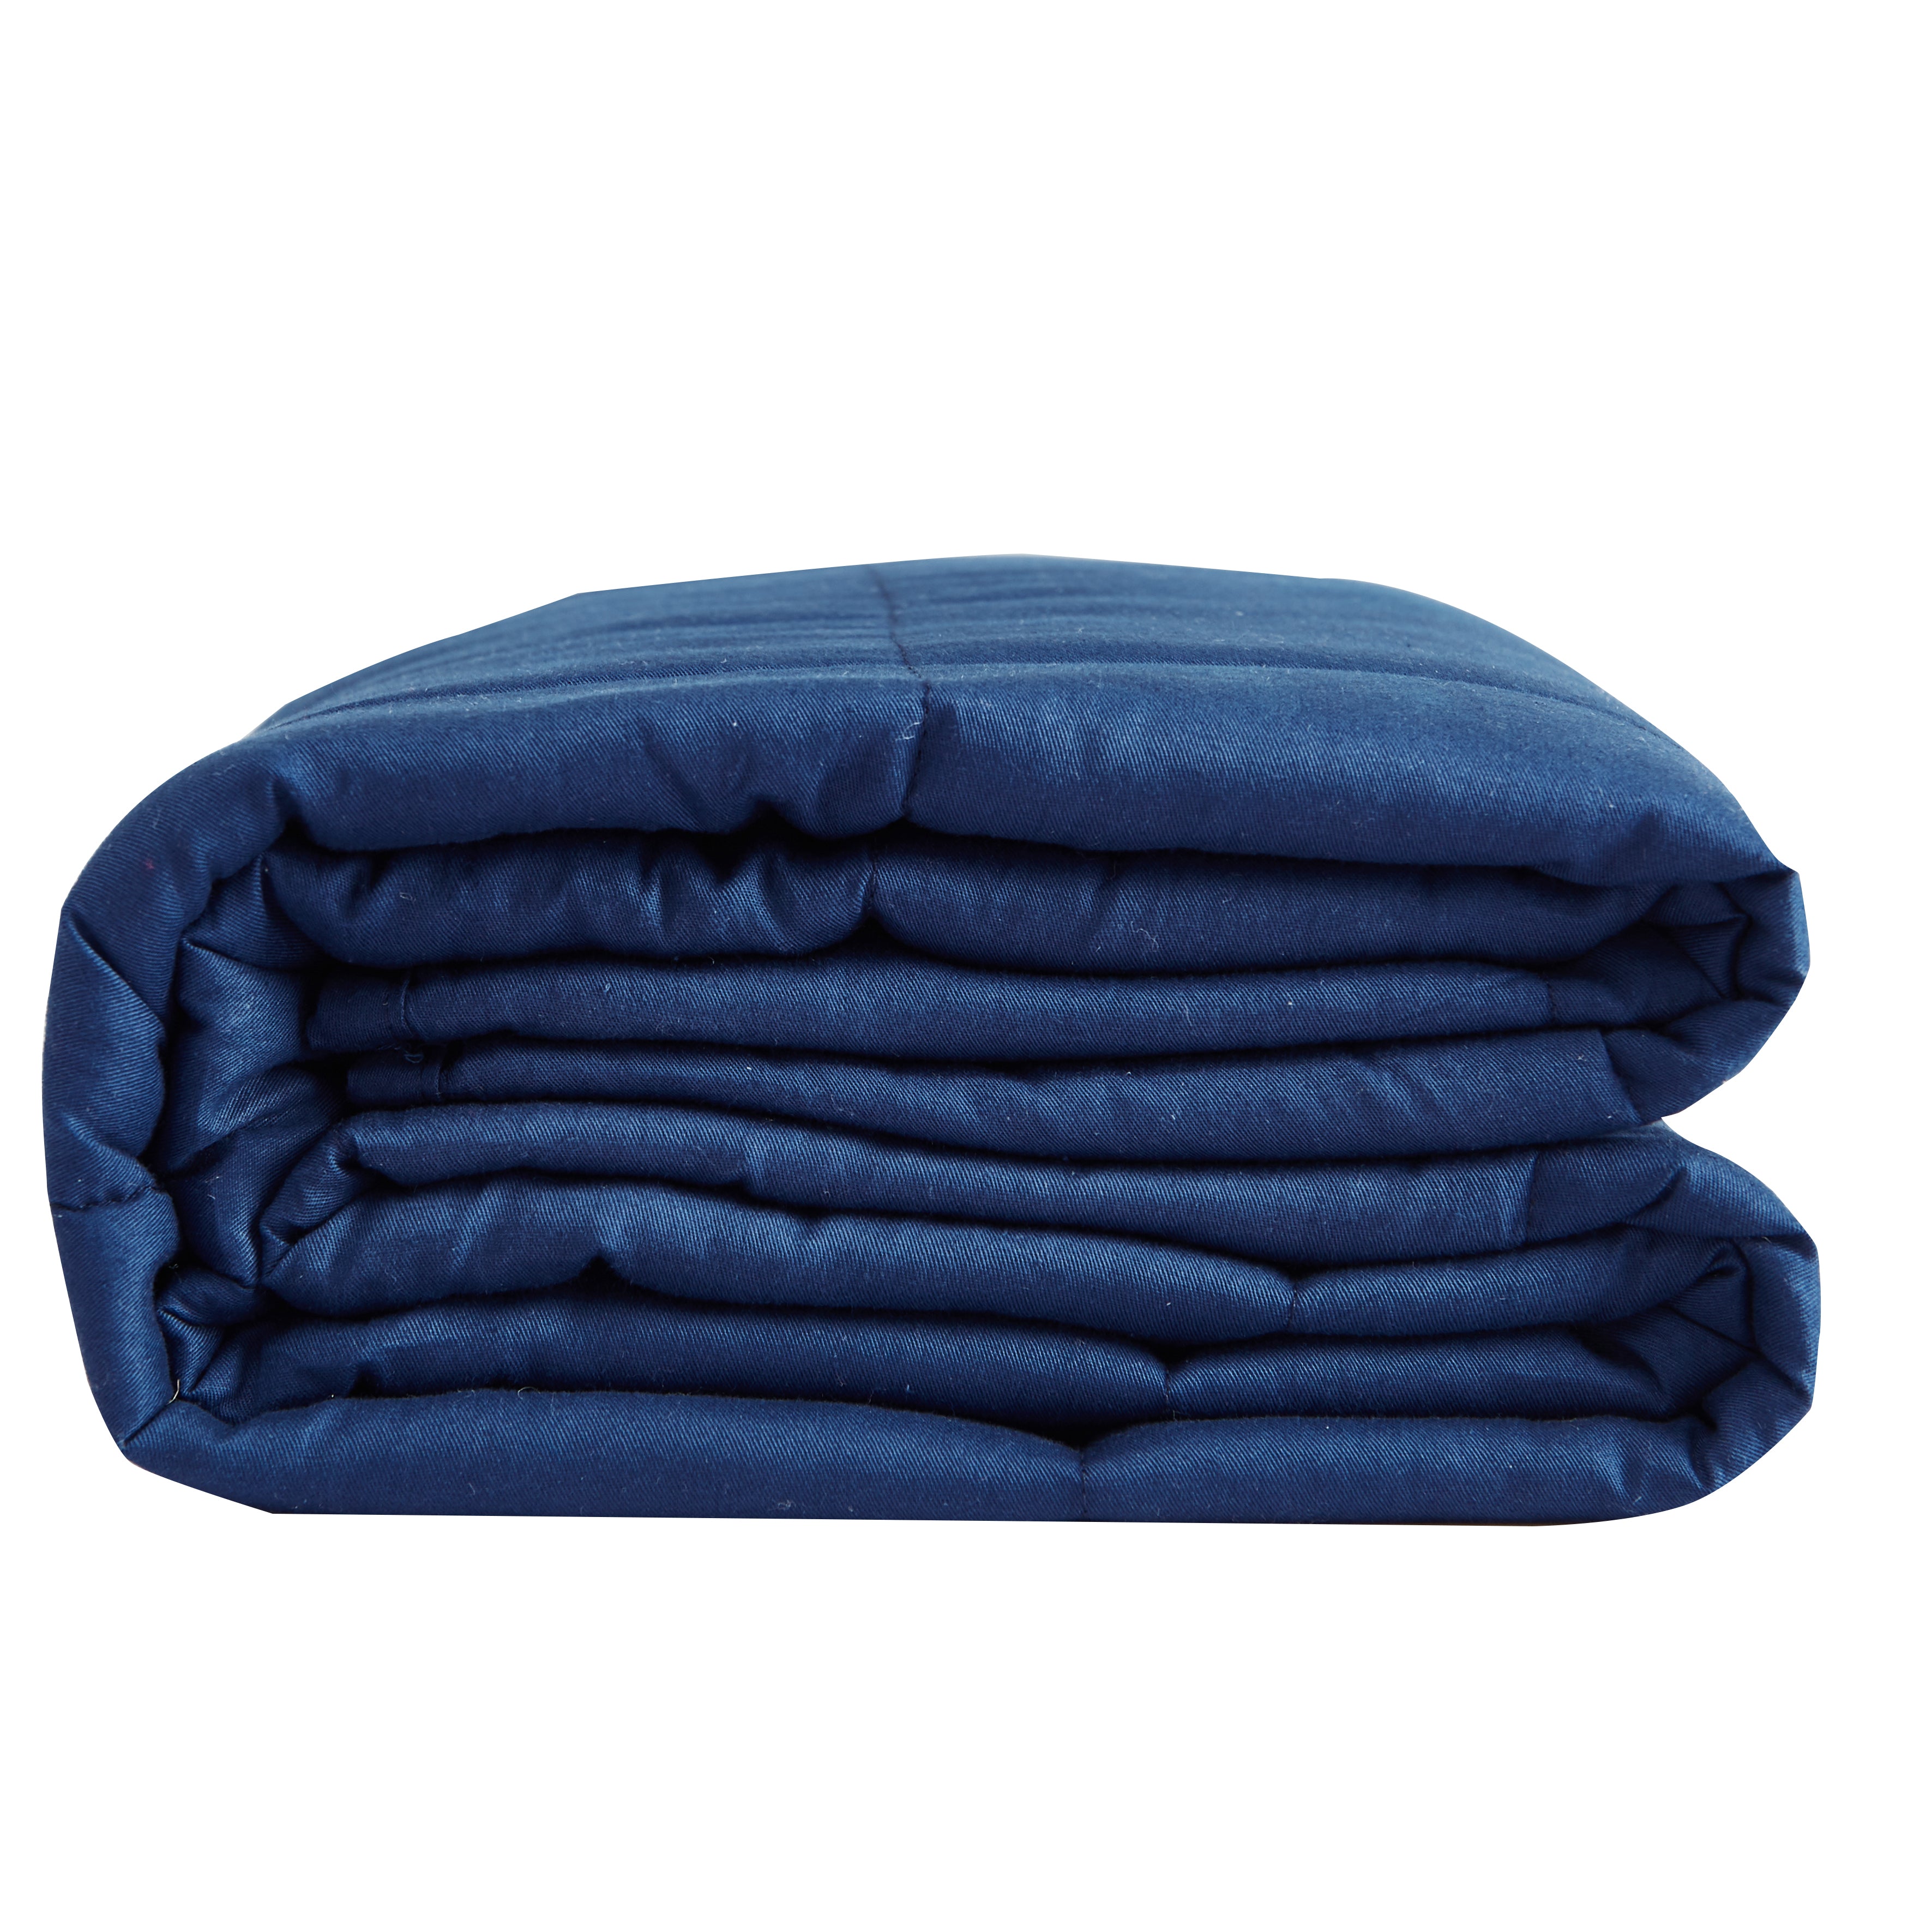 100% Cotton Weighted Blanket - 15 & 20 lb